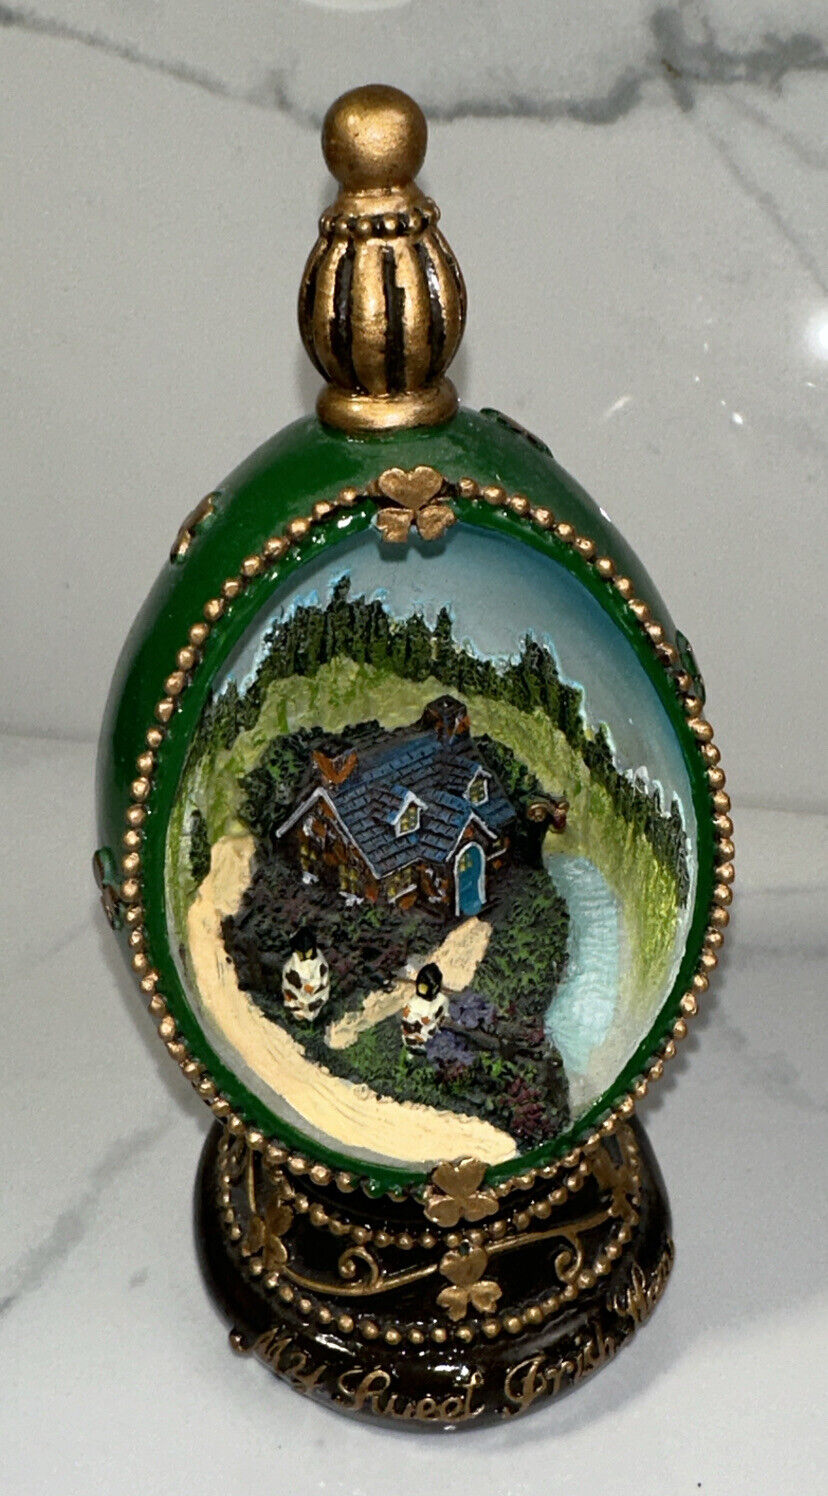 Vintage Hand-Painted Porcelain my sweet irish home musical Decor Lights Up